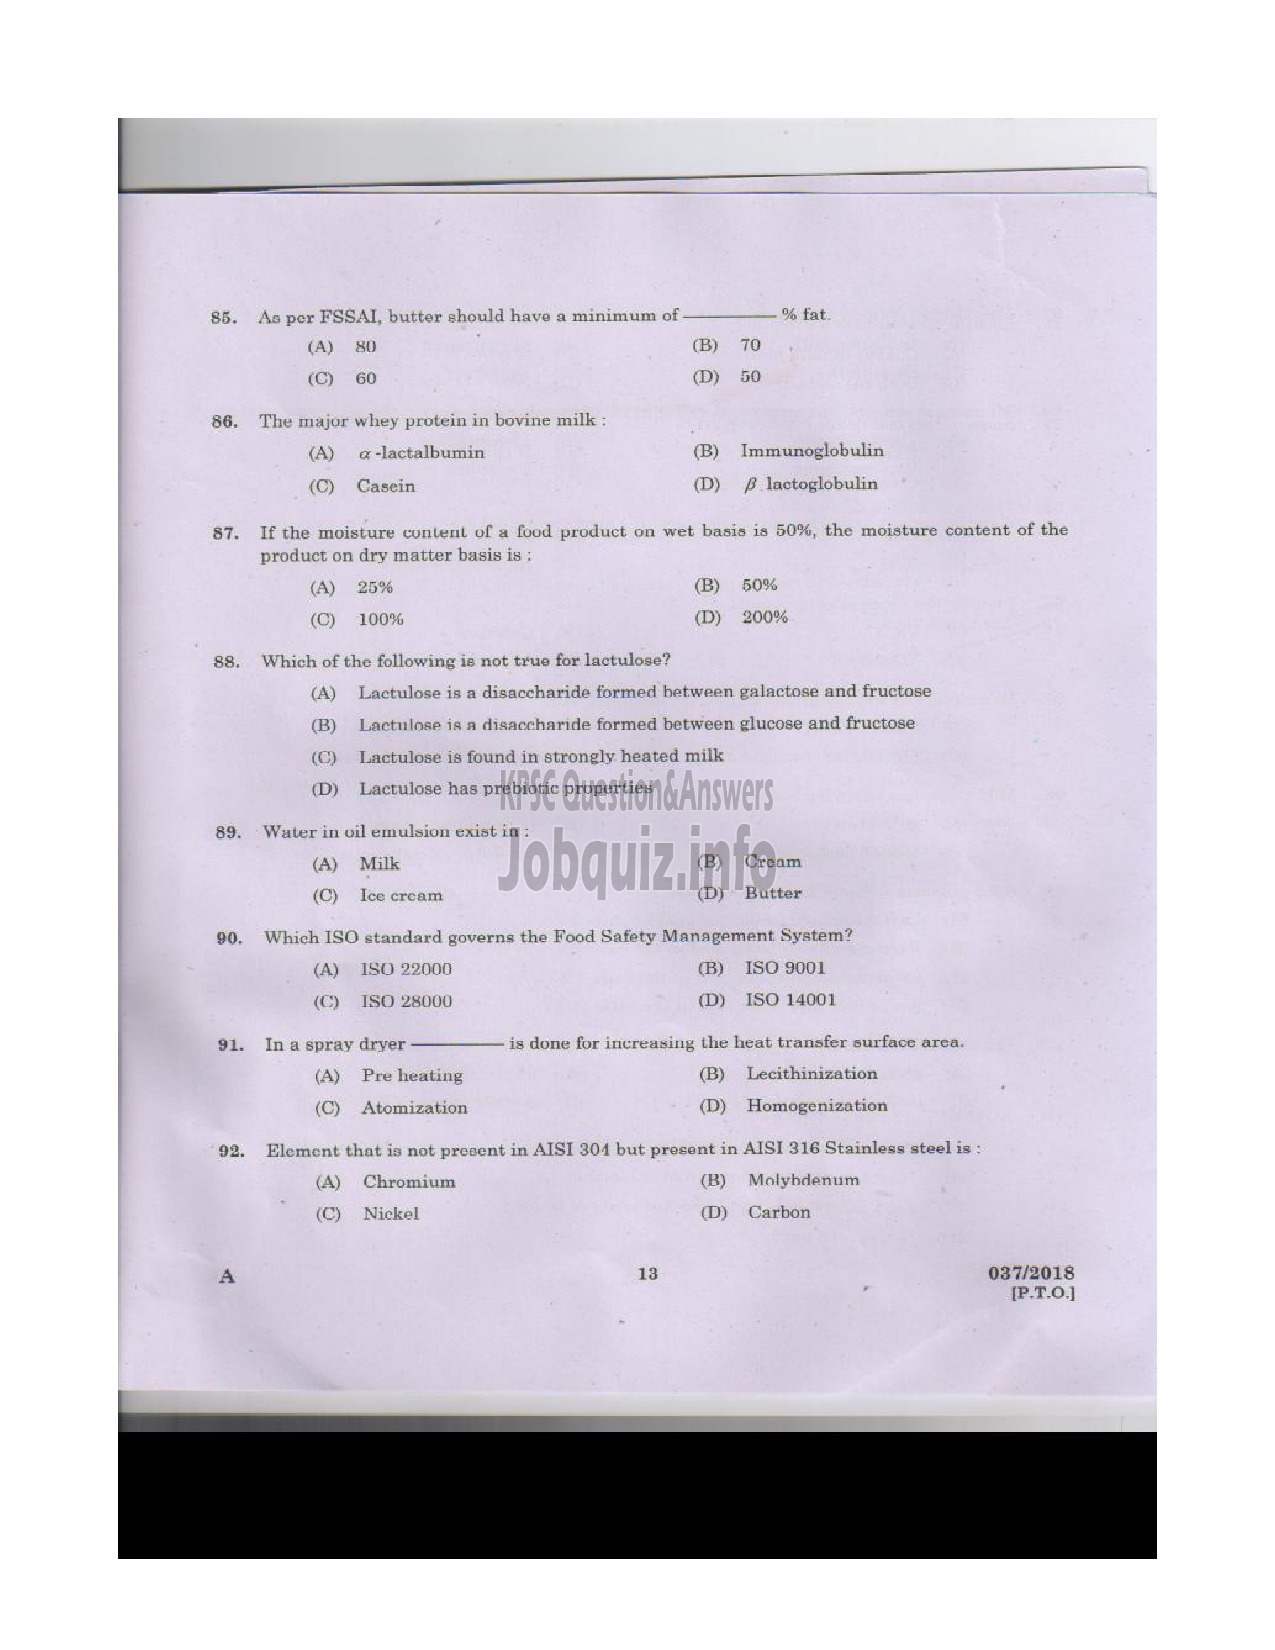 Kerala PSC Question Paper - VOCATIONAL INSTRUCTOR IN DAIRYING MILK PRODUCTS VOCATIONAL HIGHER SECONDARY EDUCATION-12